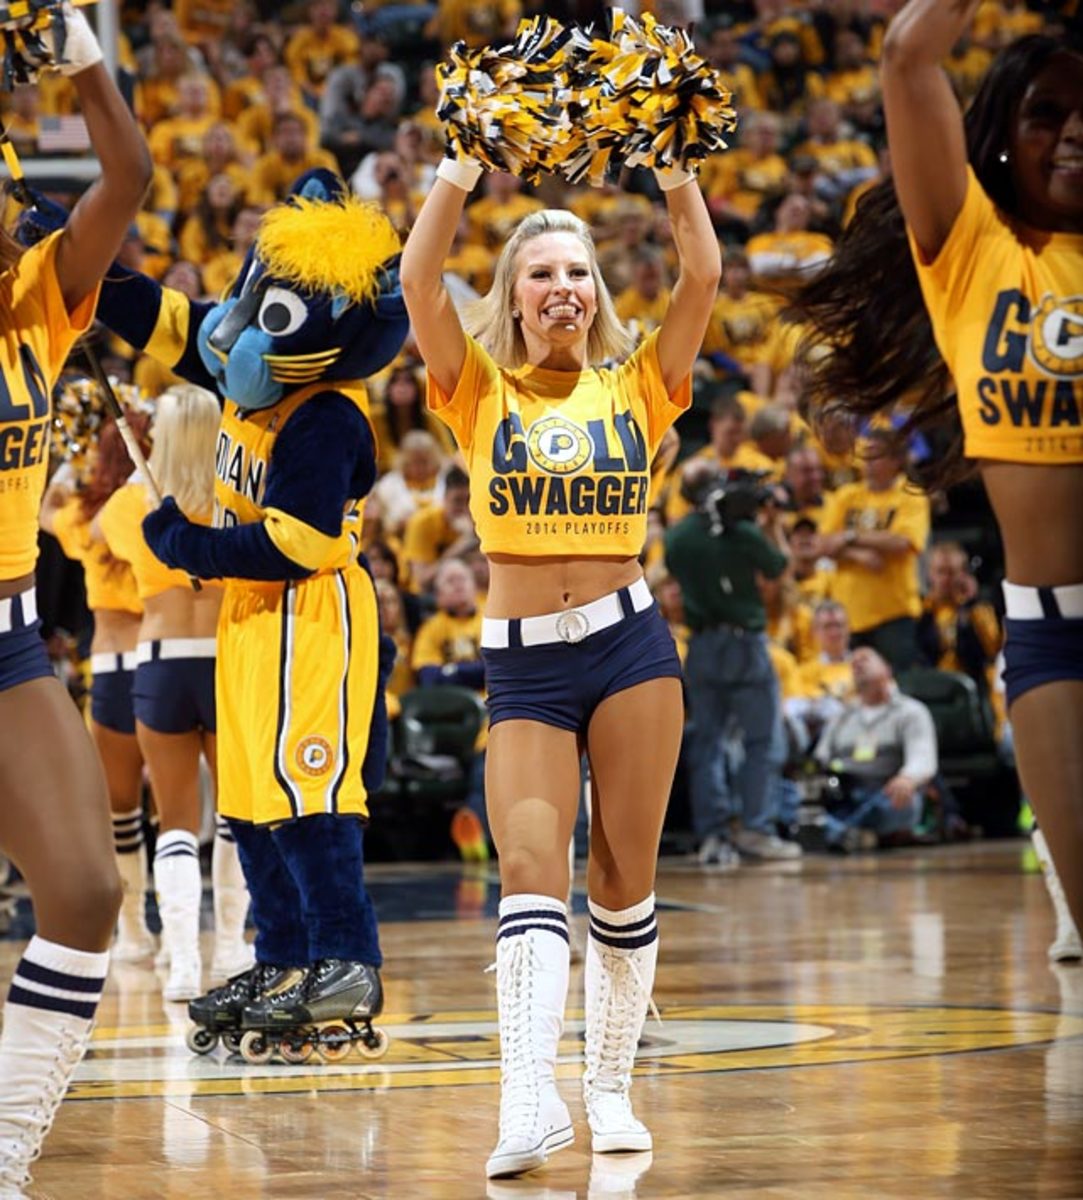 140512155846-indiana-pacers-pacemates-dancers-488353009-single-image-cut.jpg